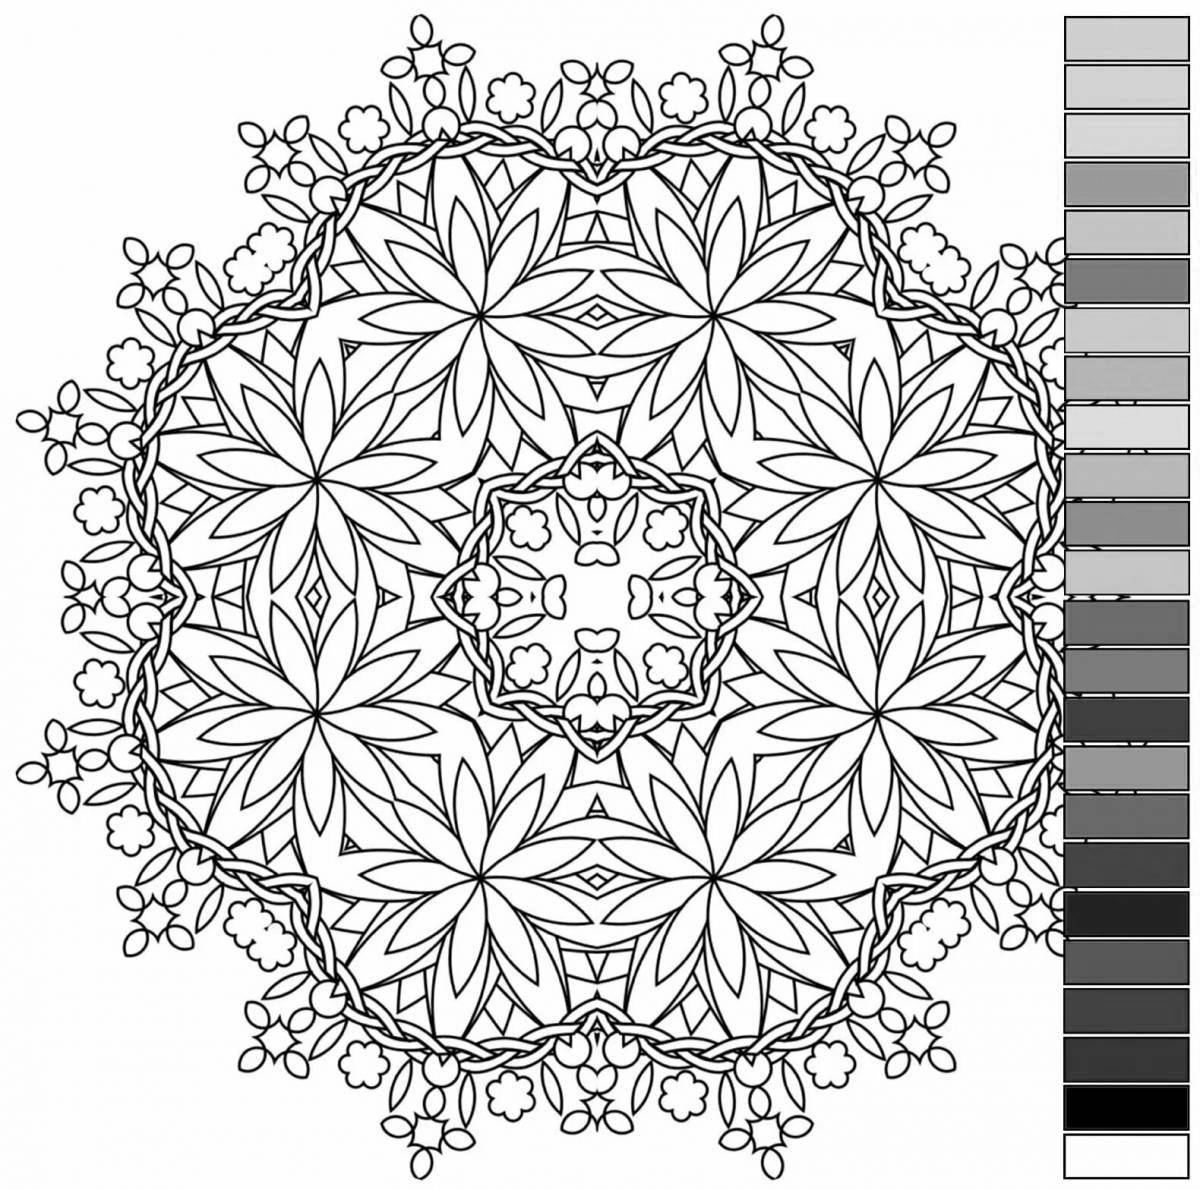 Complex mandala coloring by numbers